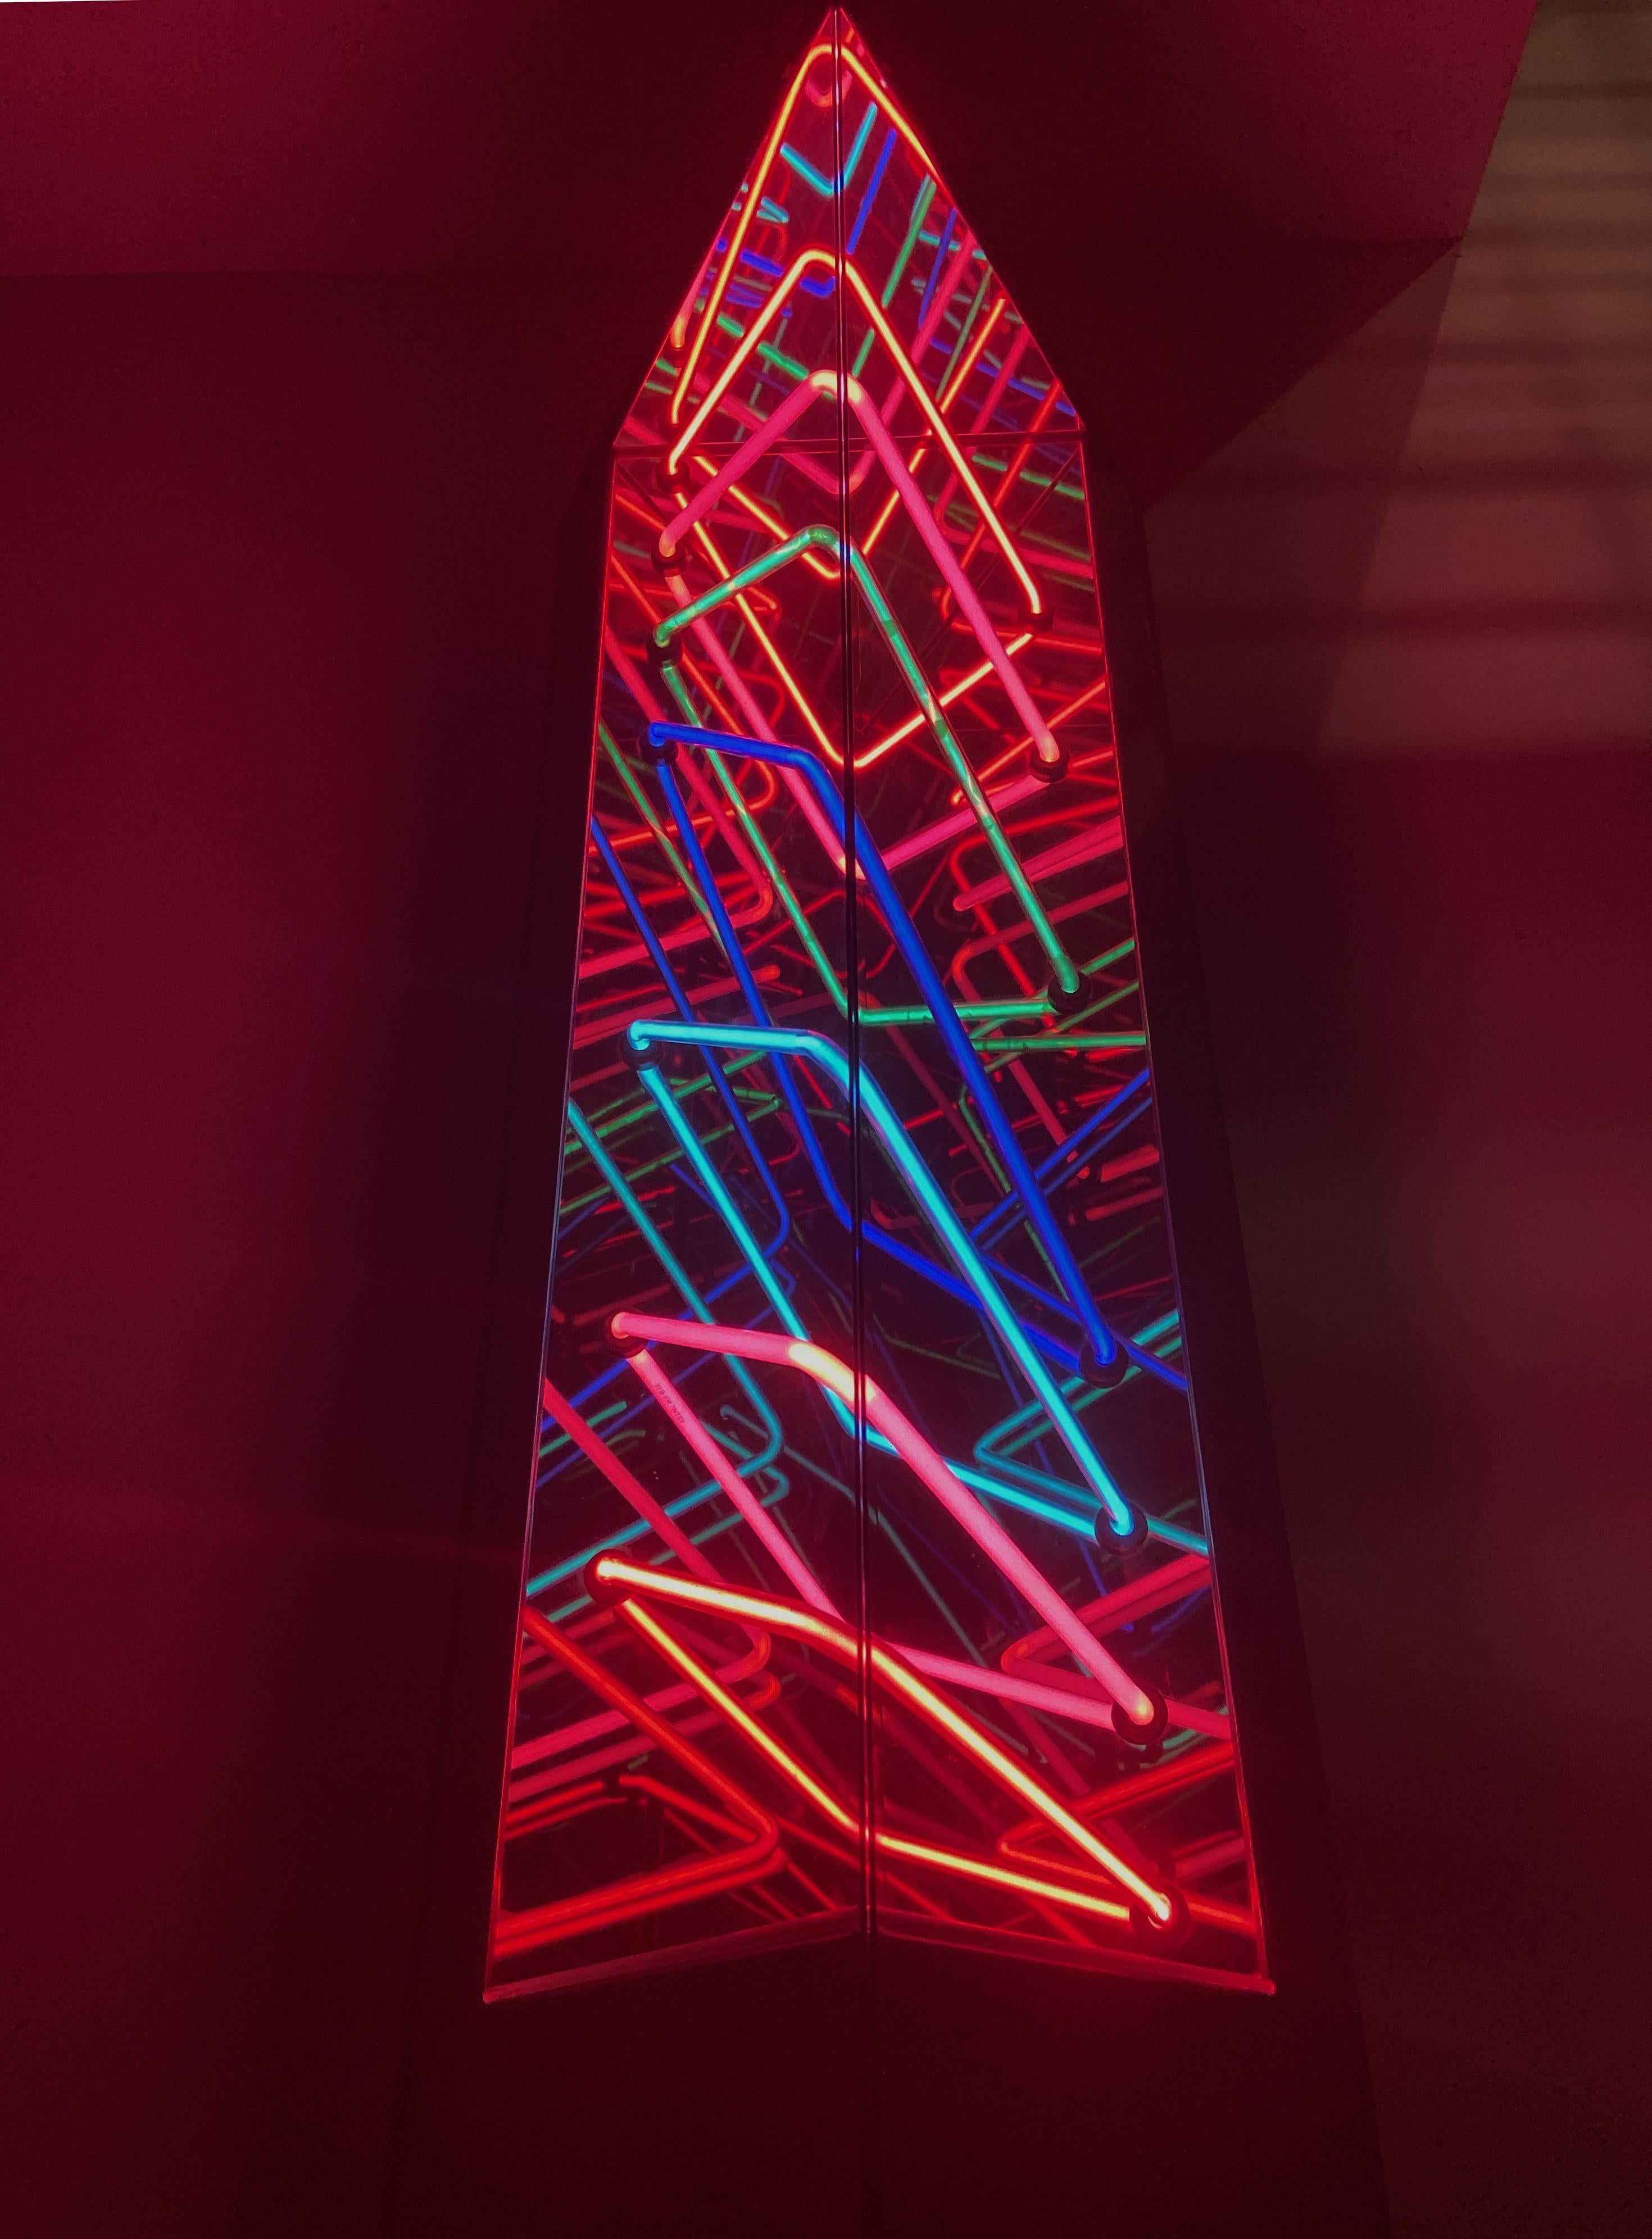 A large and impressive 1980s neon sculpture designed by Zimmerman Studios and produced by Archigraphics LA in 1987. Comes complete with pedestal as shown. Signed and numbered.